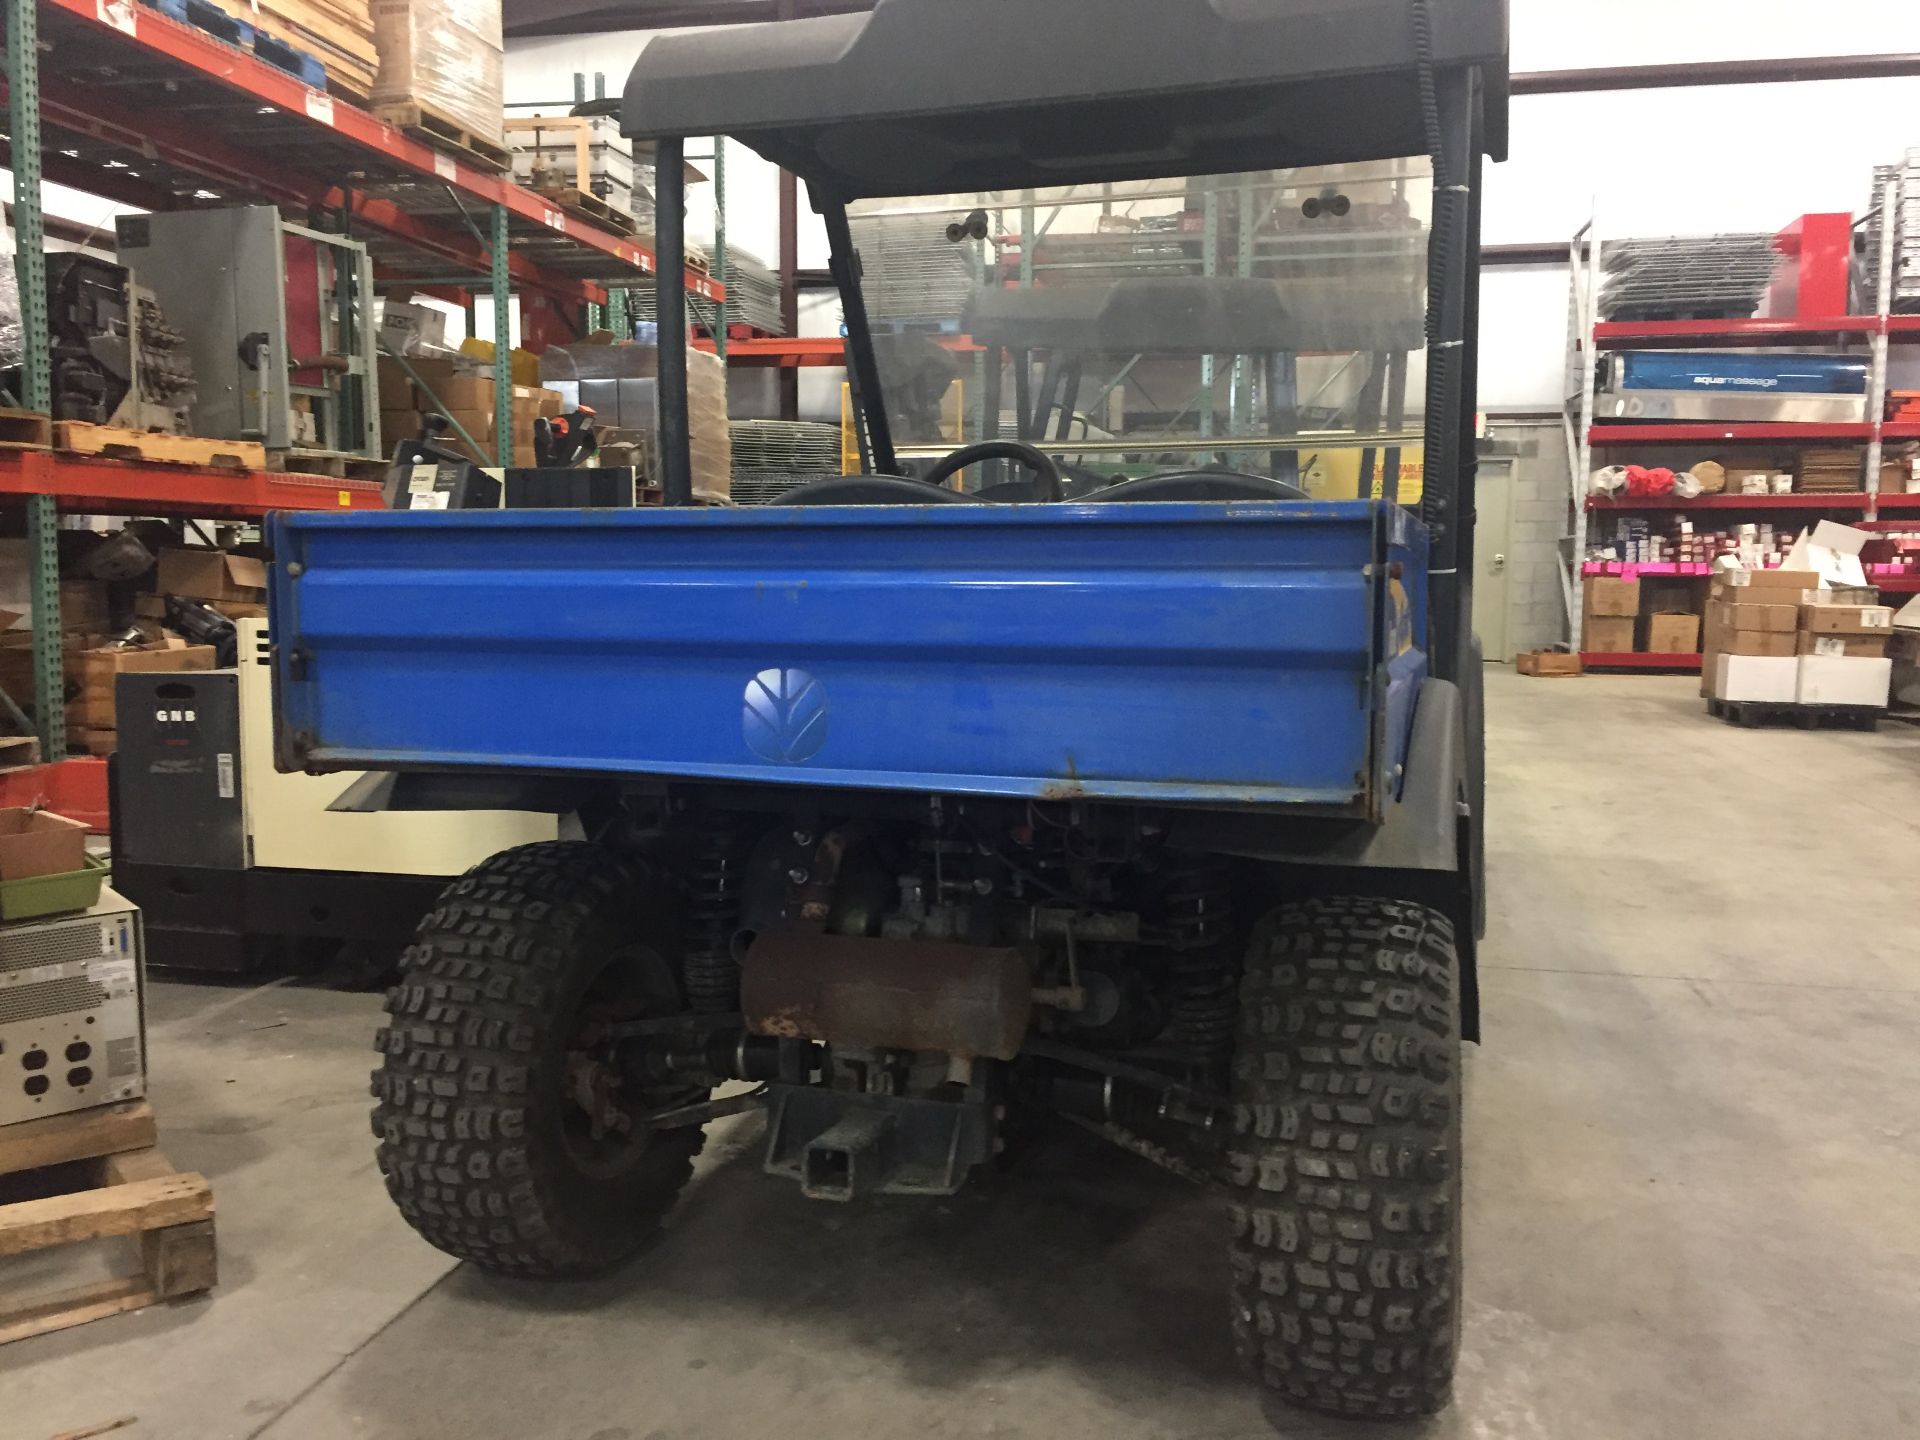 NEW HOLLAND ATV, 2012. ALLUMINUM RIMS, MOD 726800016, 230.5 HRS SHOWING, DUMP BED, 4x4, GAS - Image 3 of 7